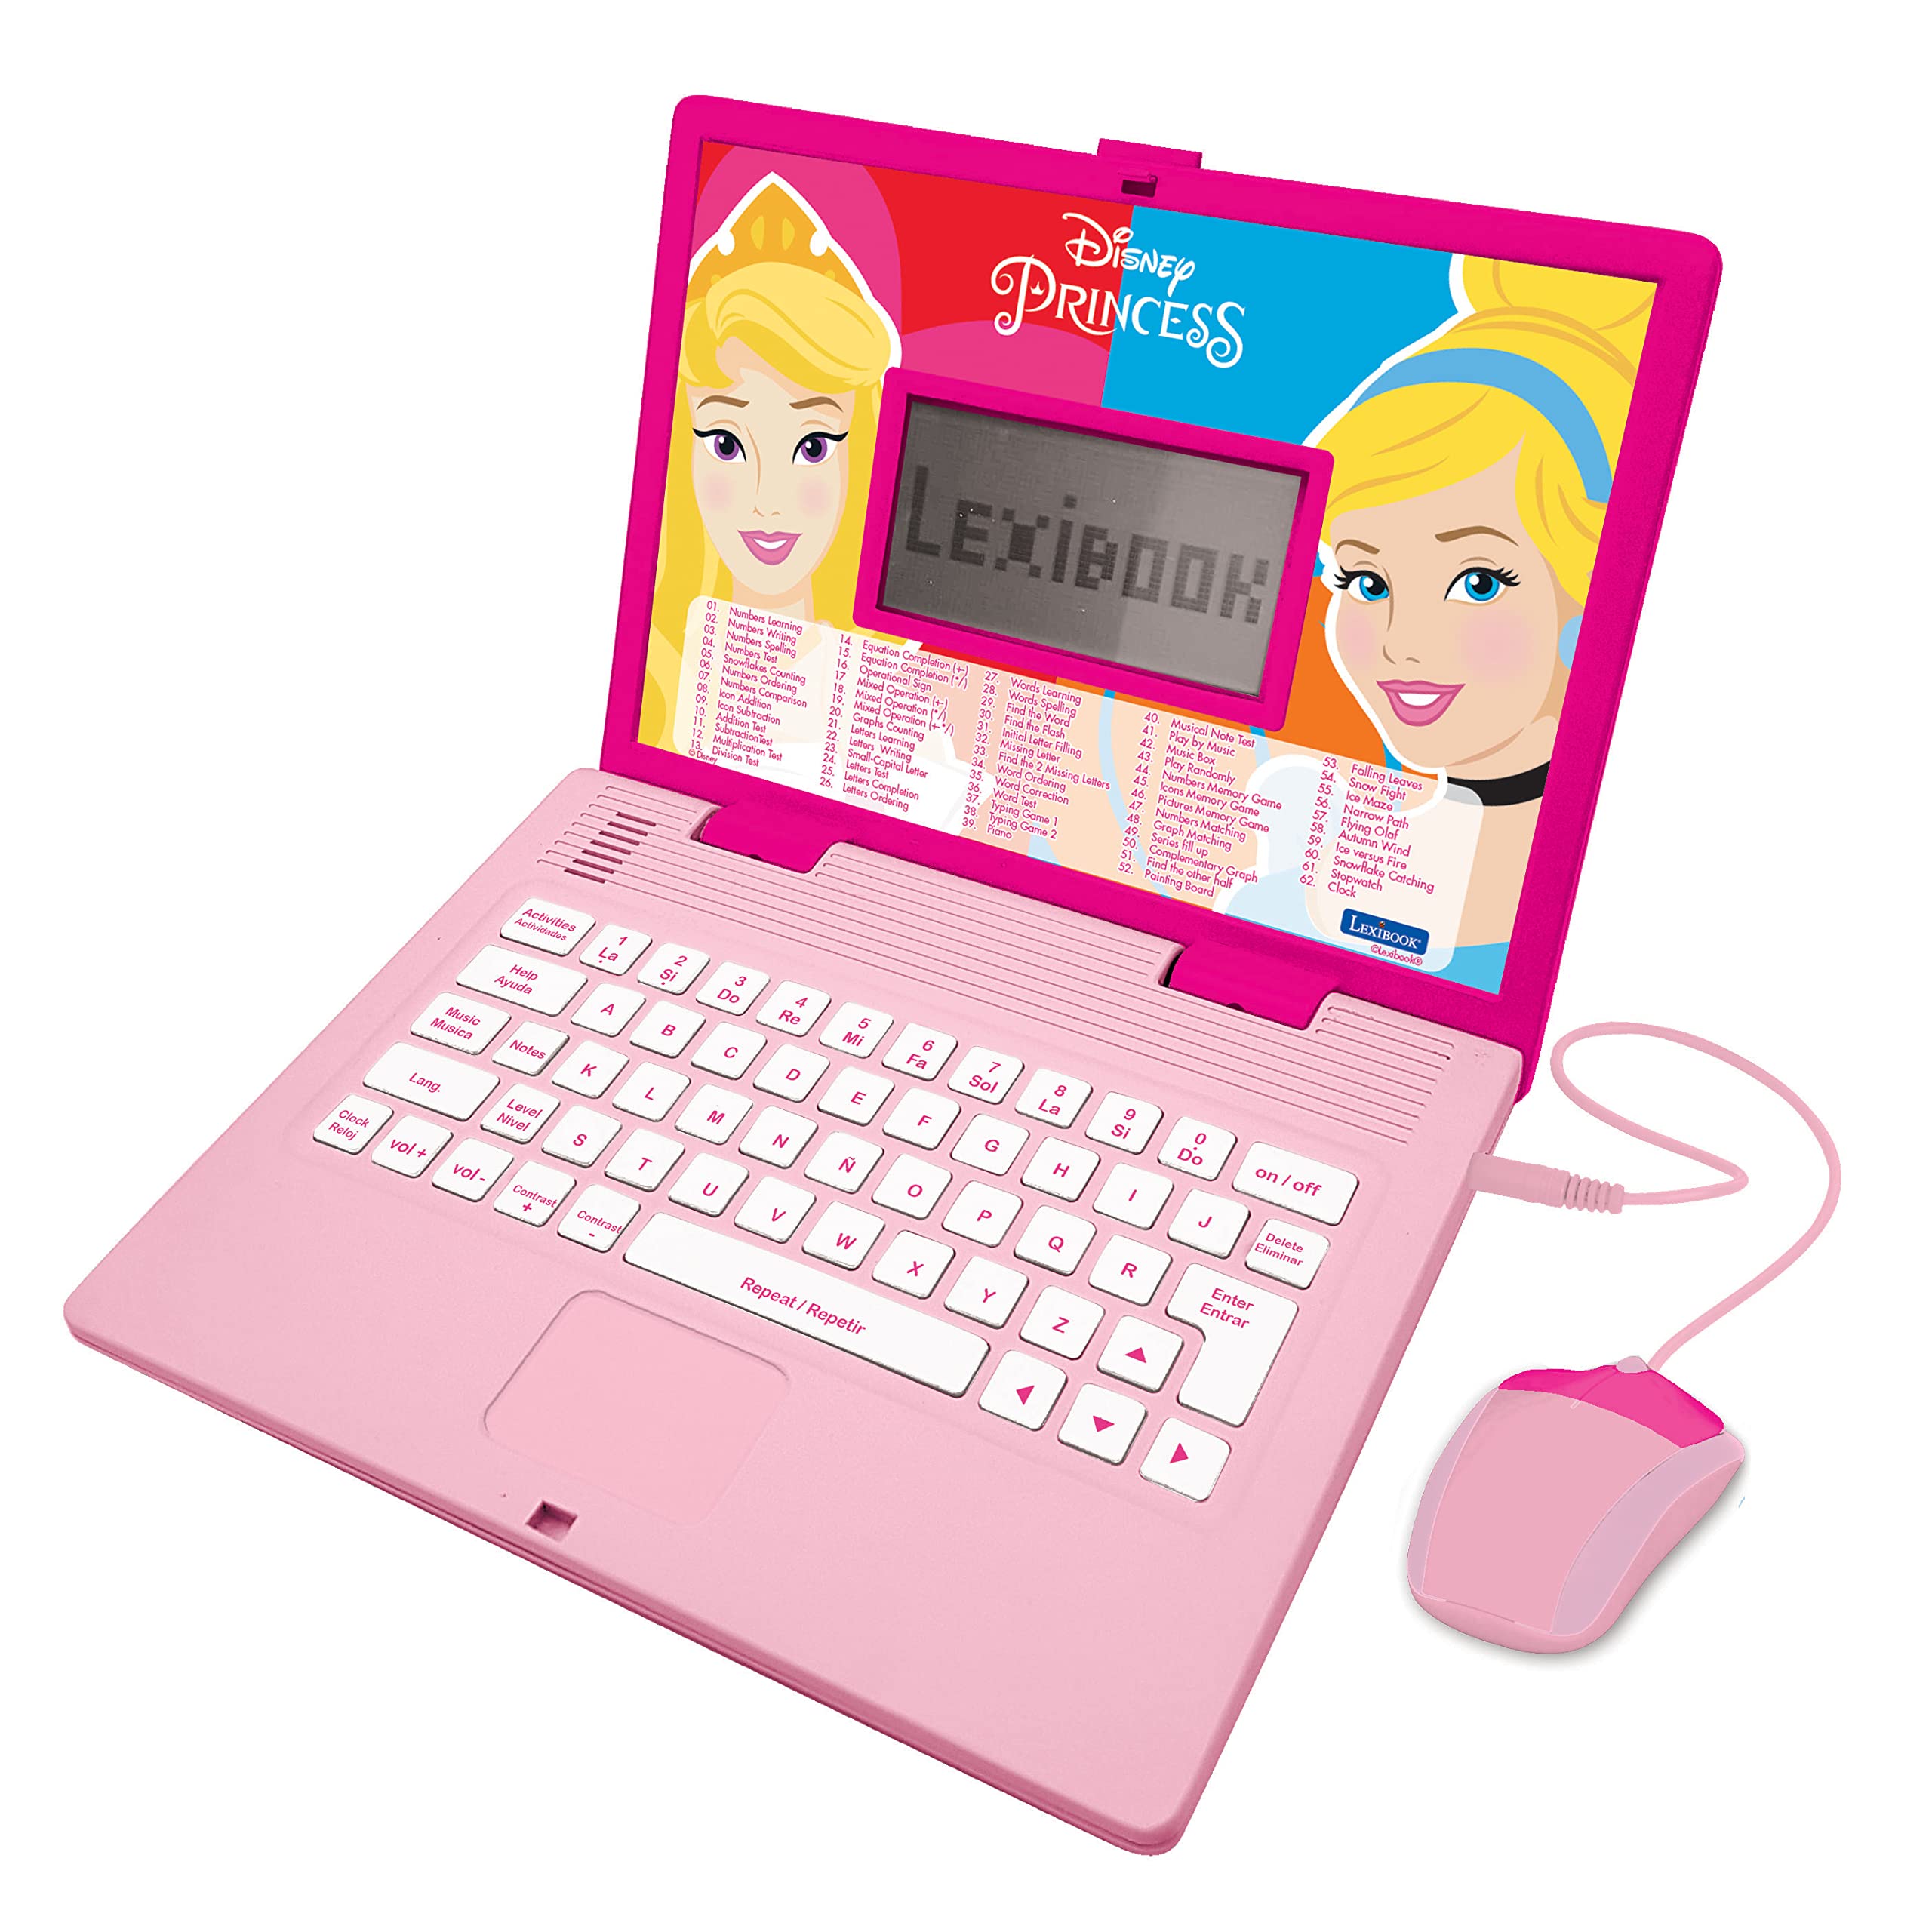 Lexibook Disney Princess - Educational and Bilingual Laptop Spanish/English - Girls Toy with 124 Activities to Learn, Play Games and Music - Pink JC598DPi2